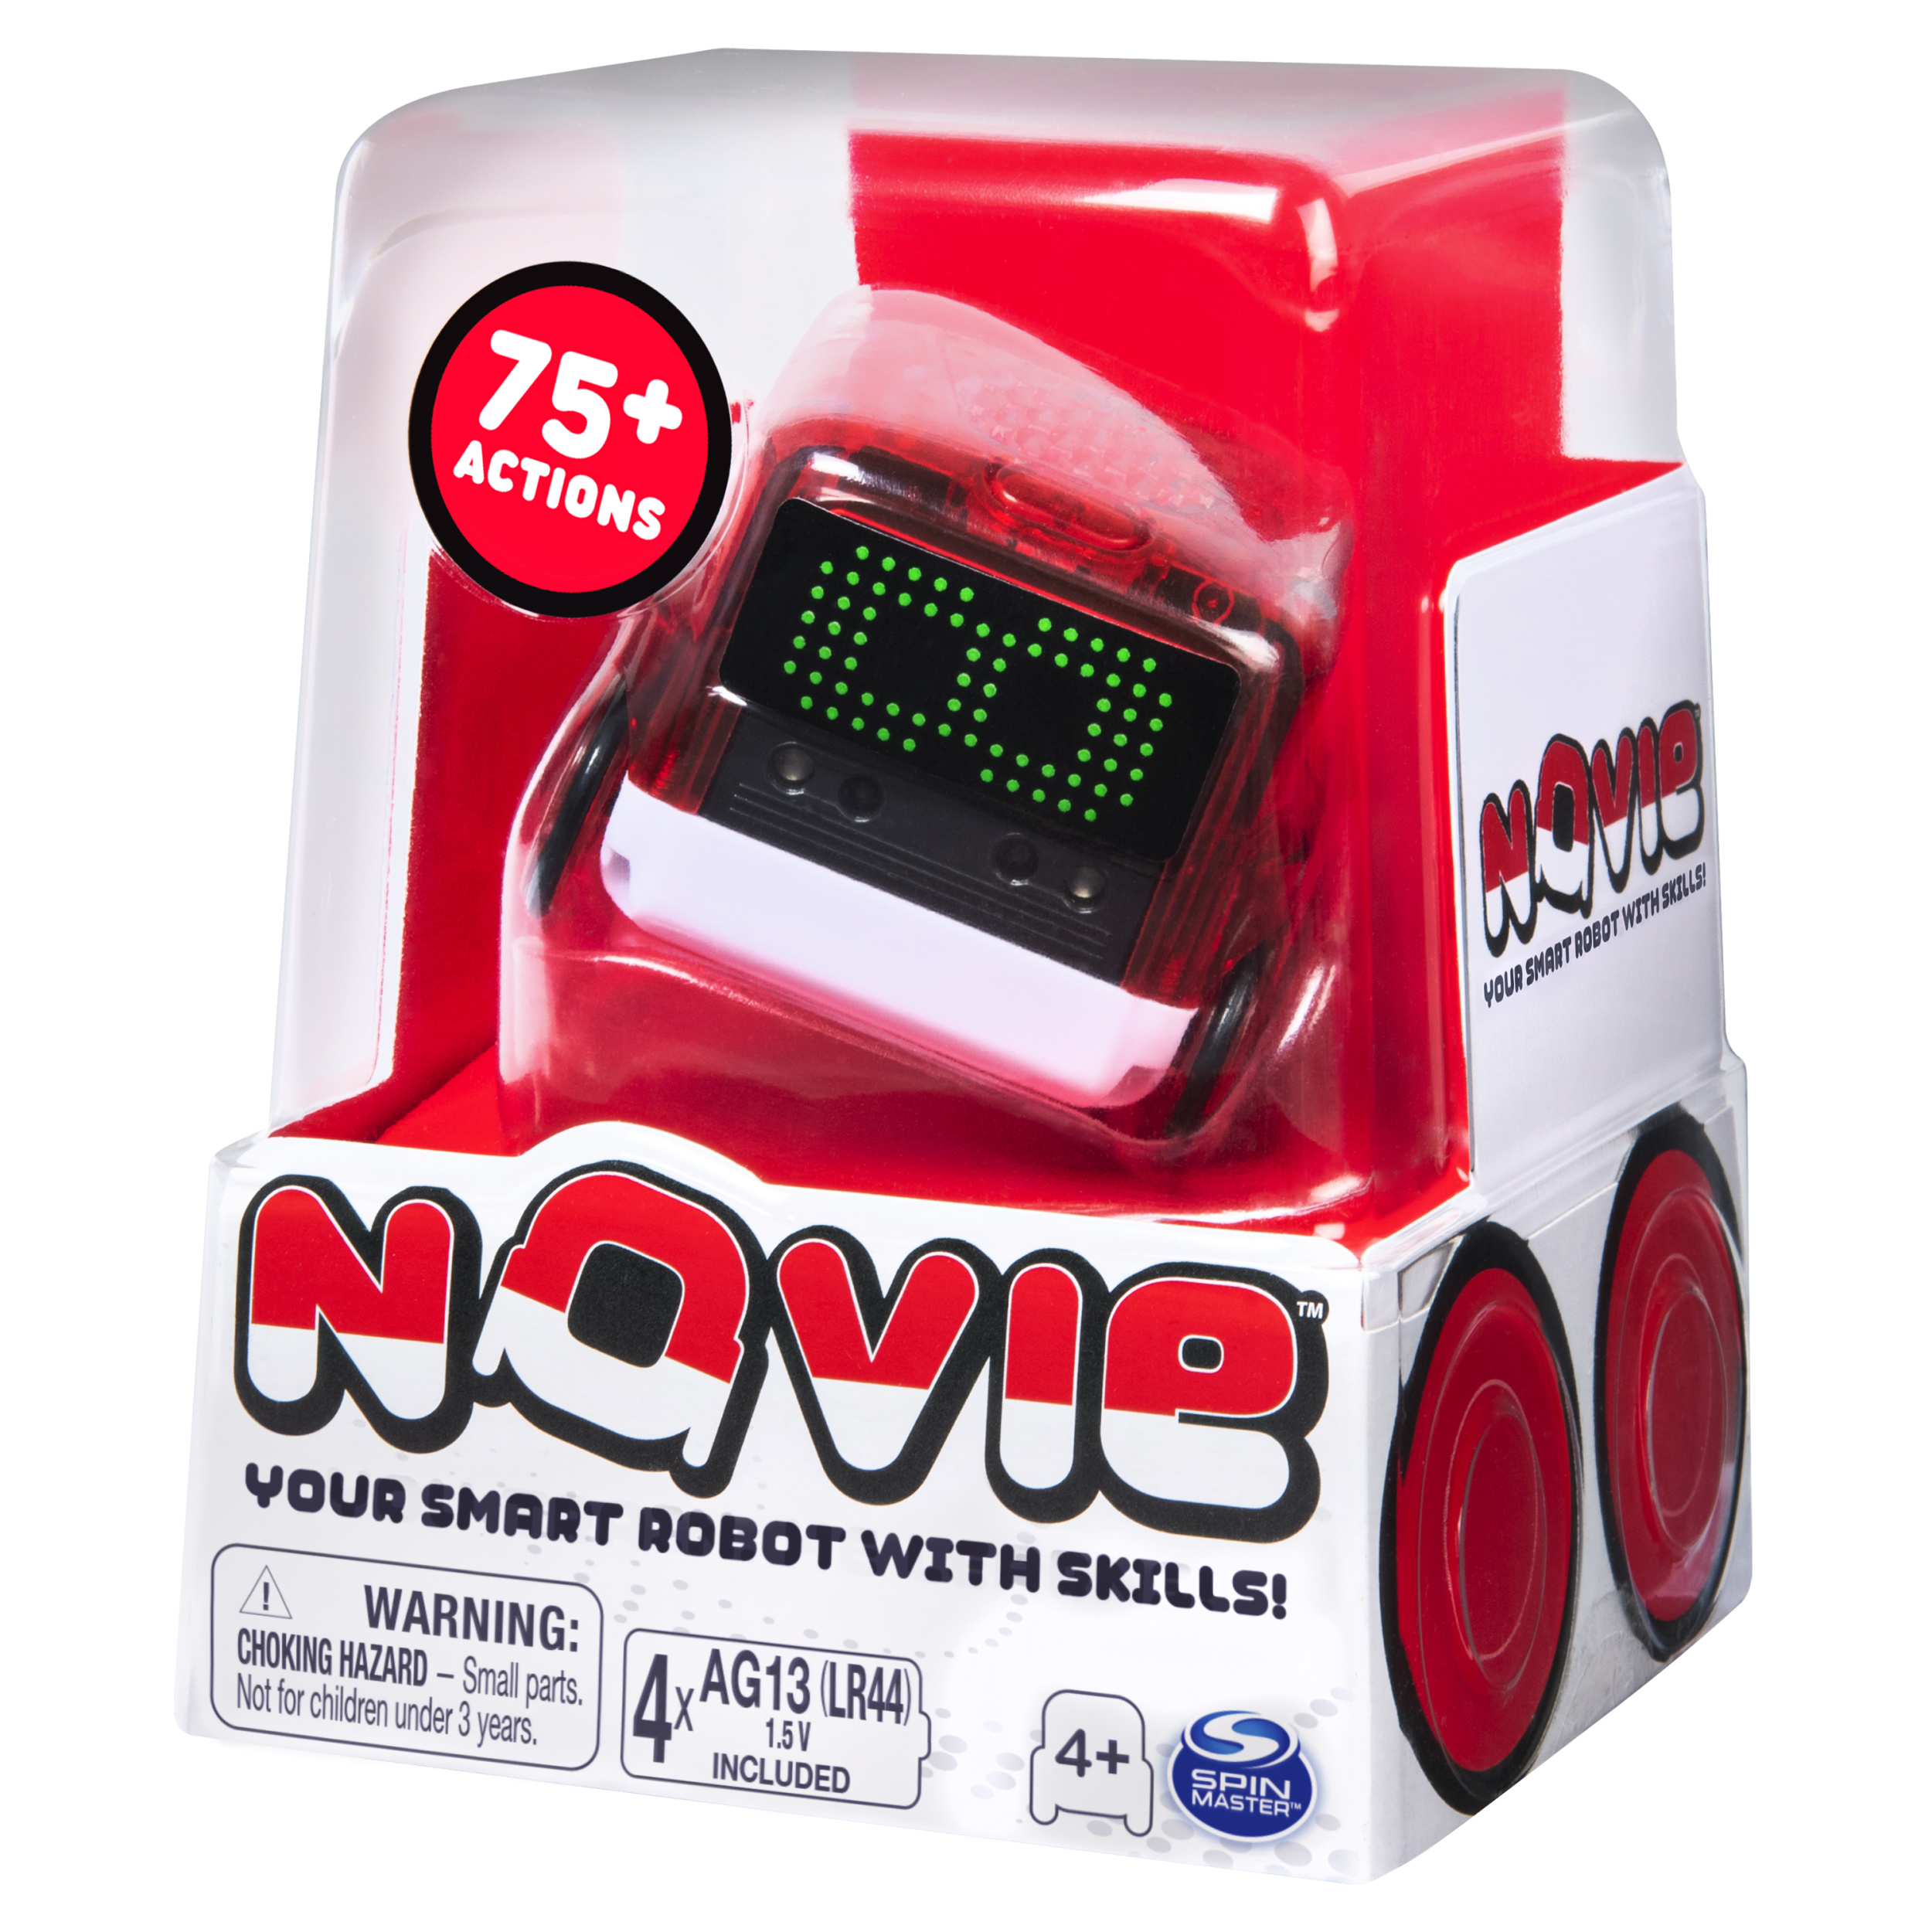 Novie Interactive Smart Robot with Over 75 Actions and Learns 12 Tricks (Red) - image 5 of 7